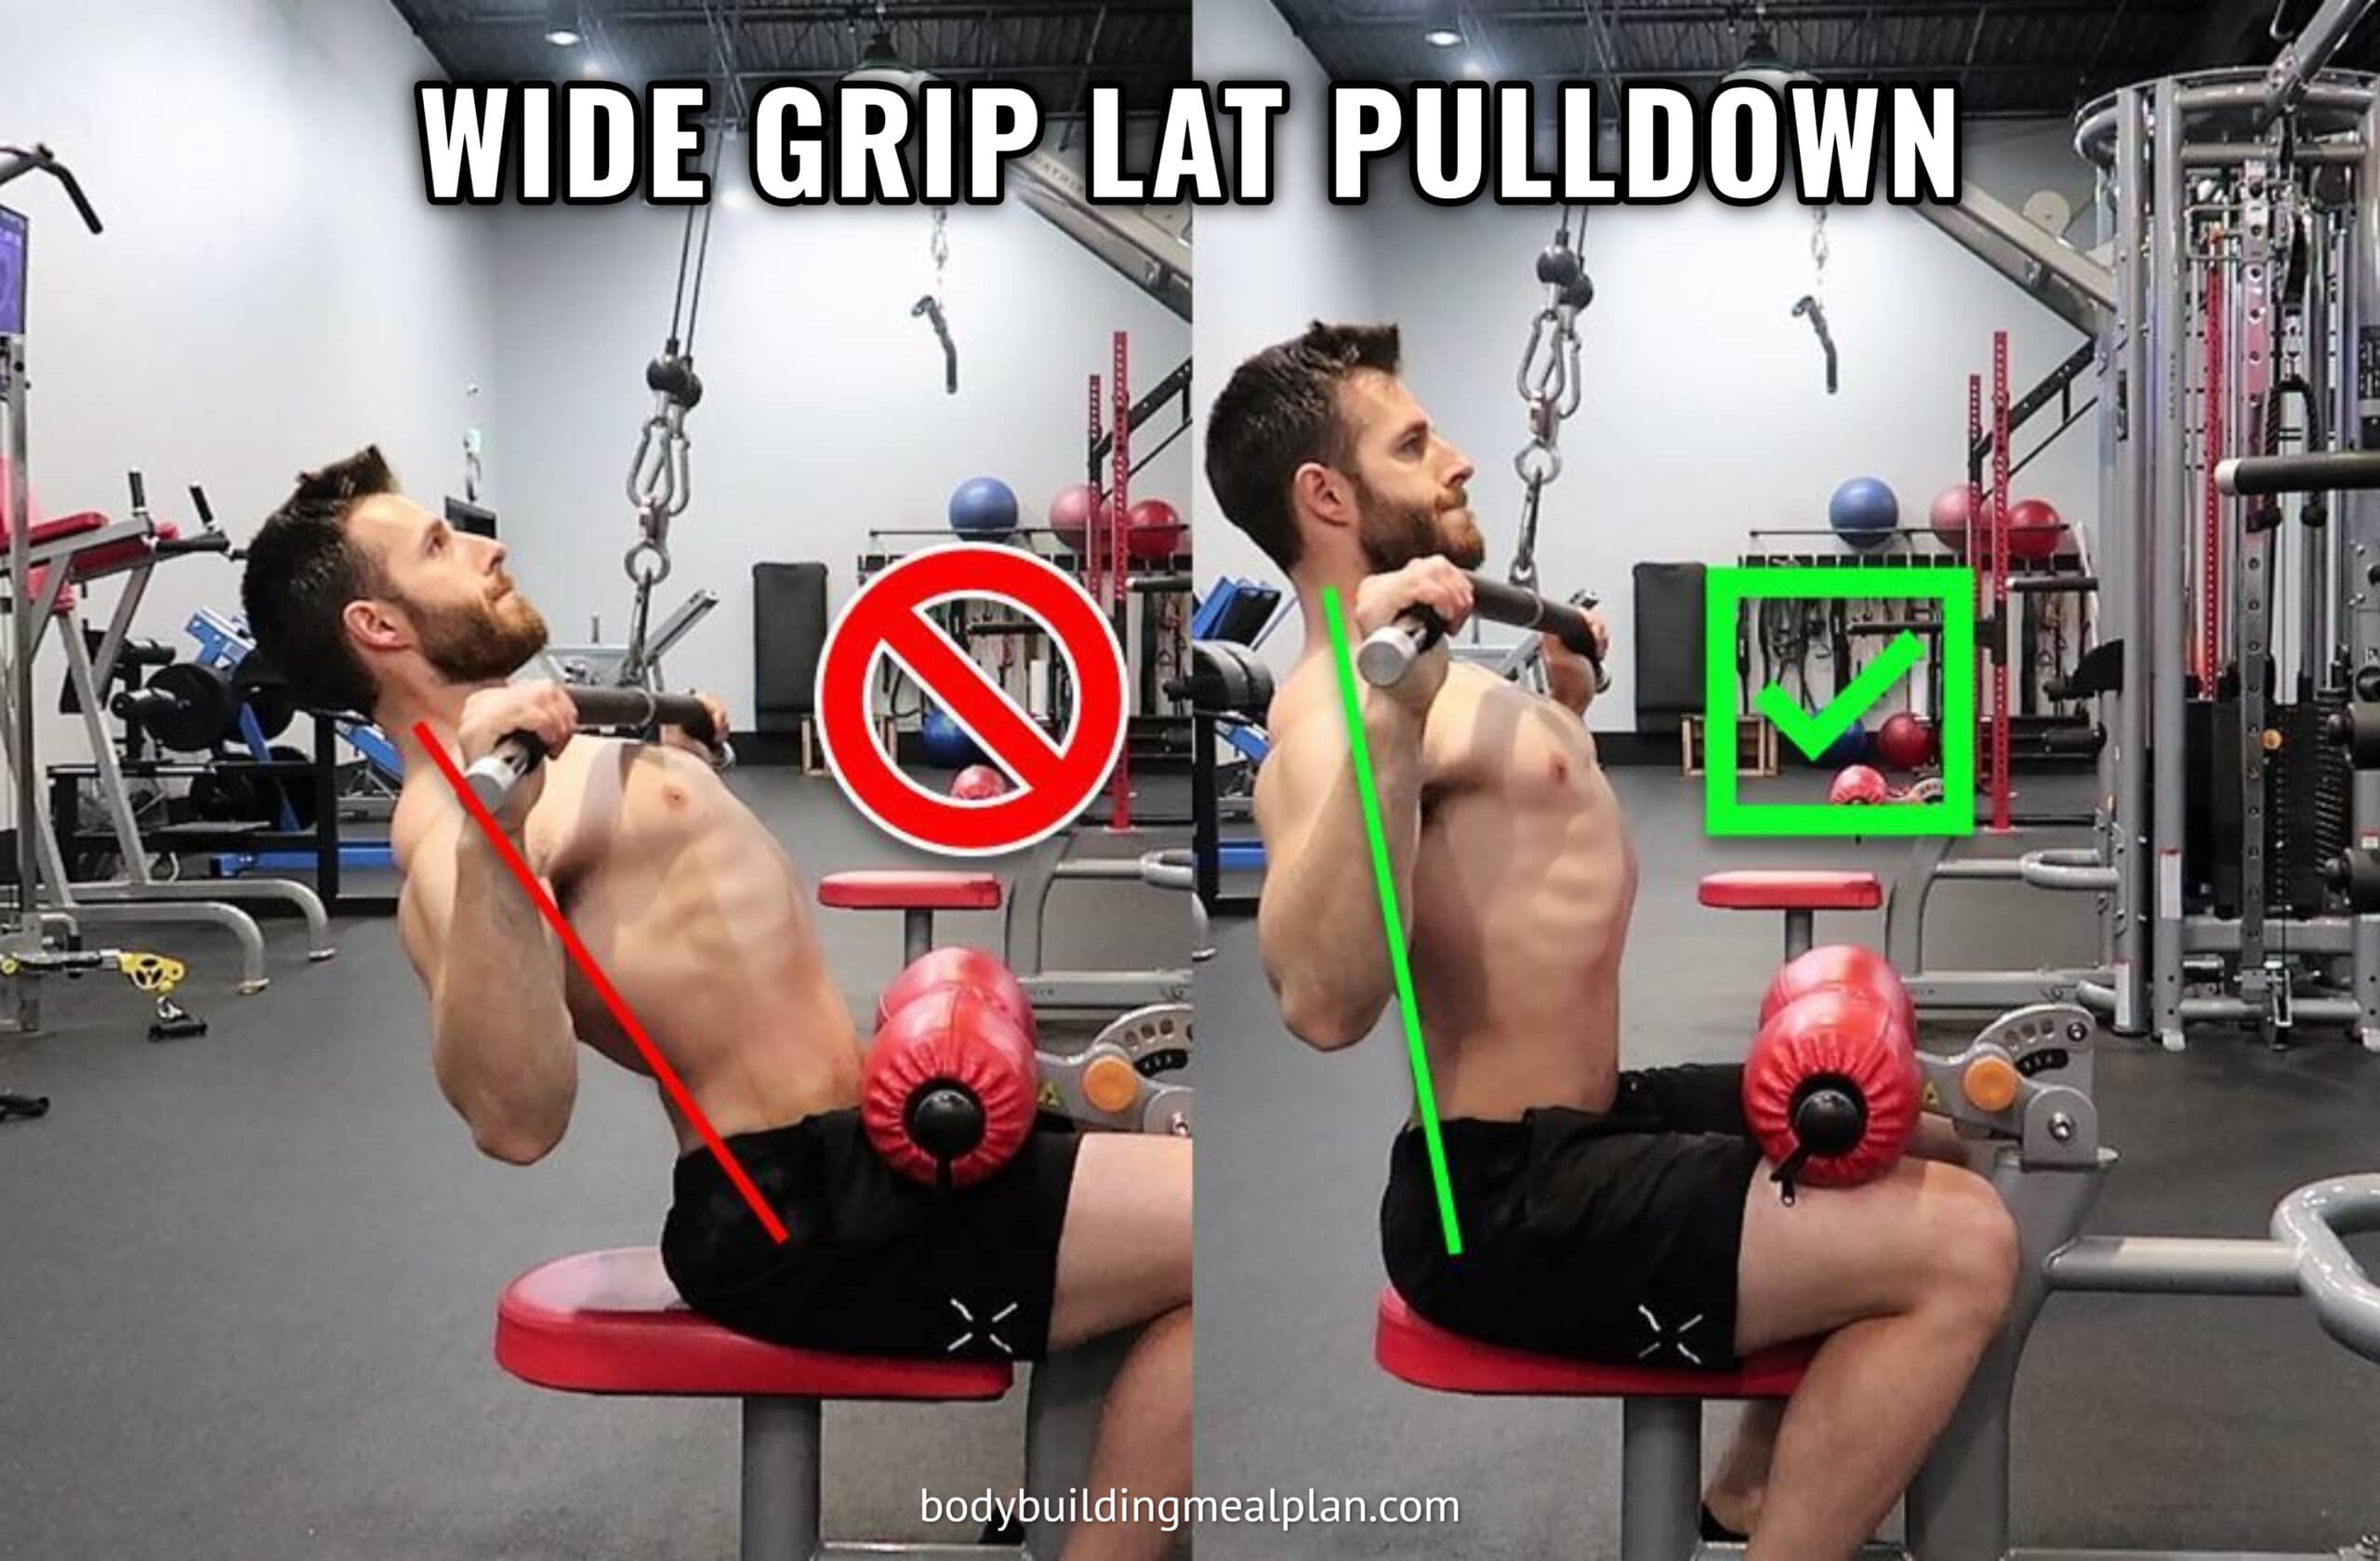 Wide Grip Lat Pulldown Blog Cover 2